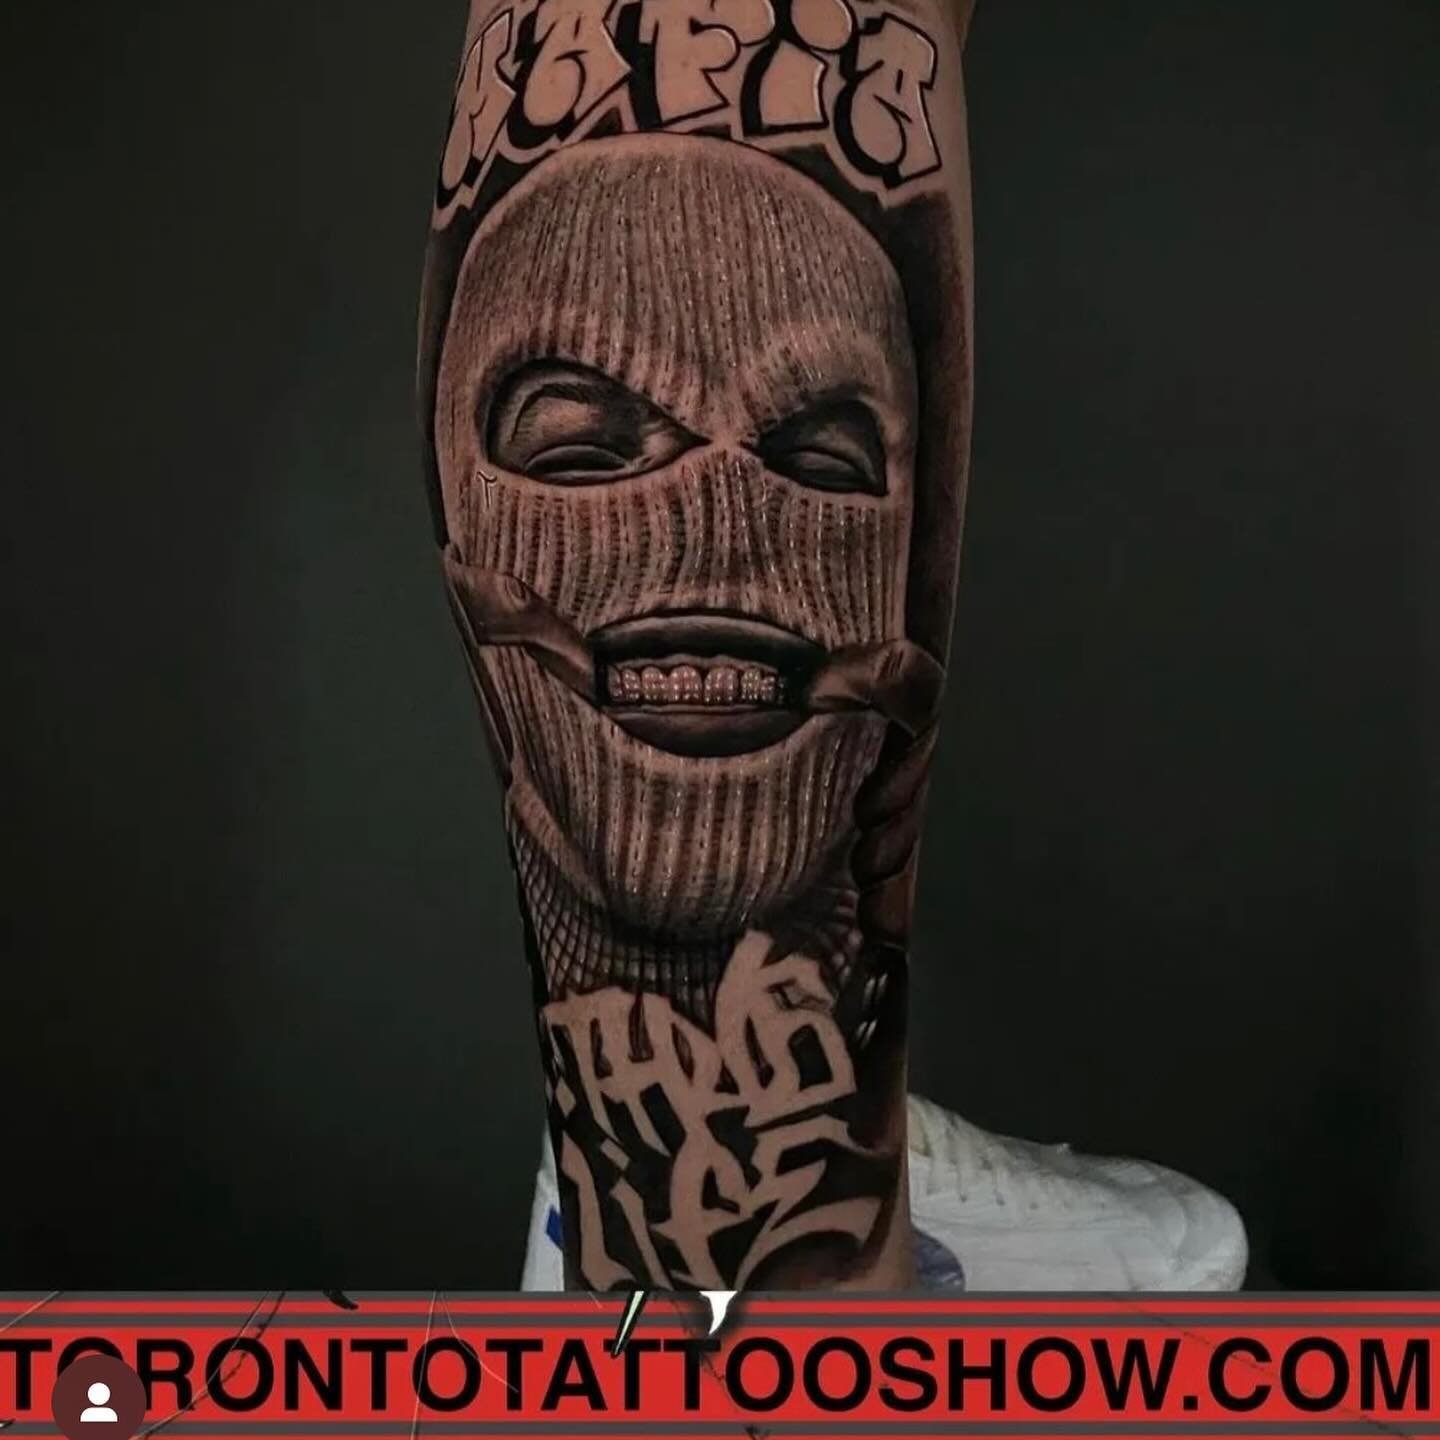 Will you be joining us at the Toronto Tattoo show?